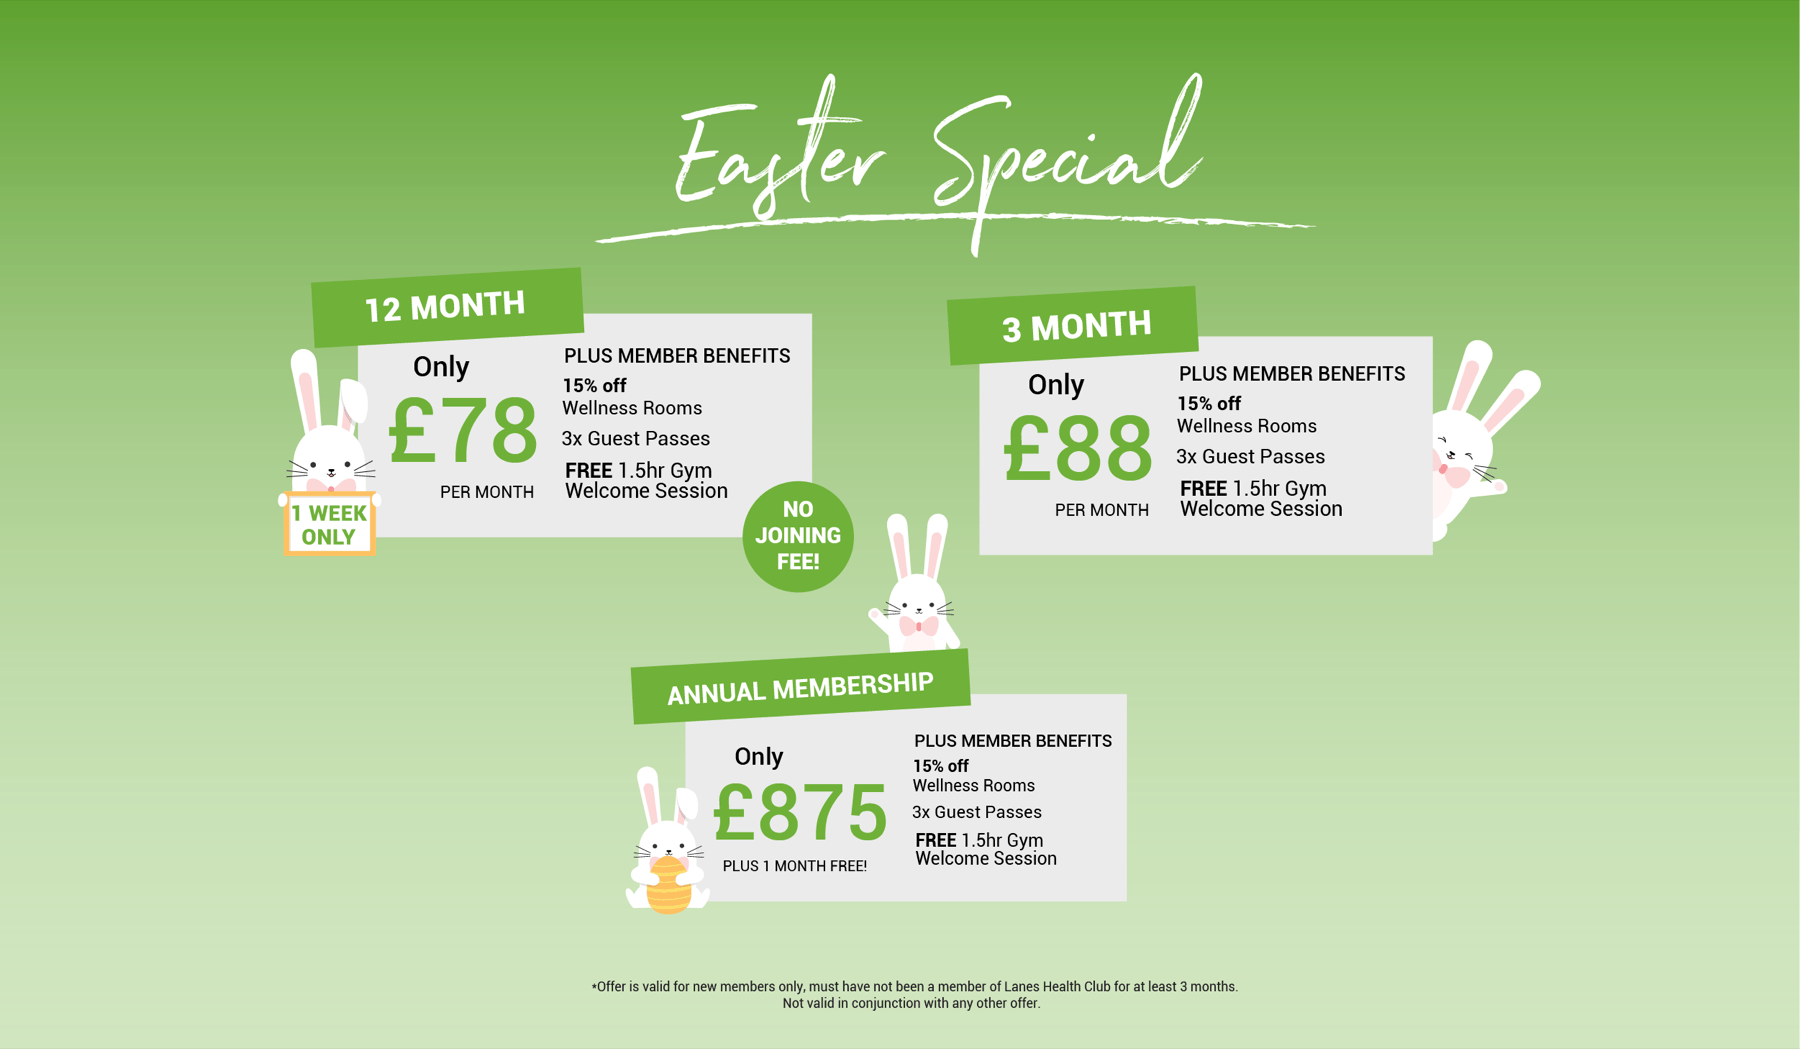 Easter promotion £78pm